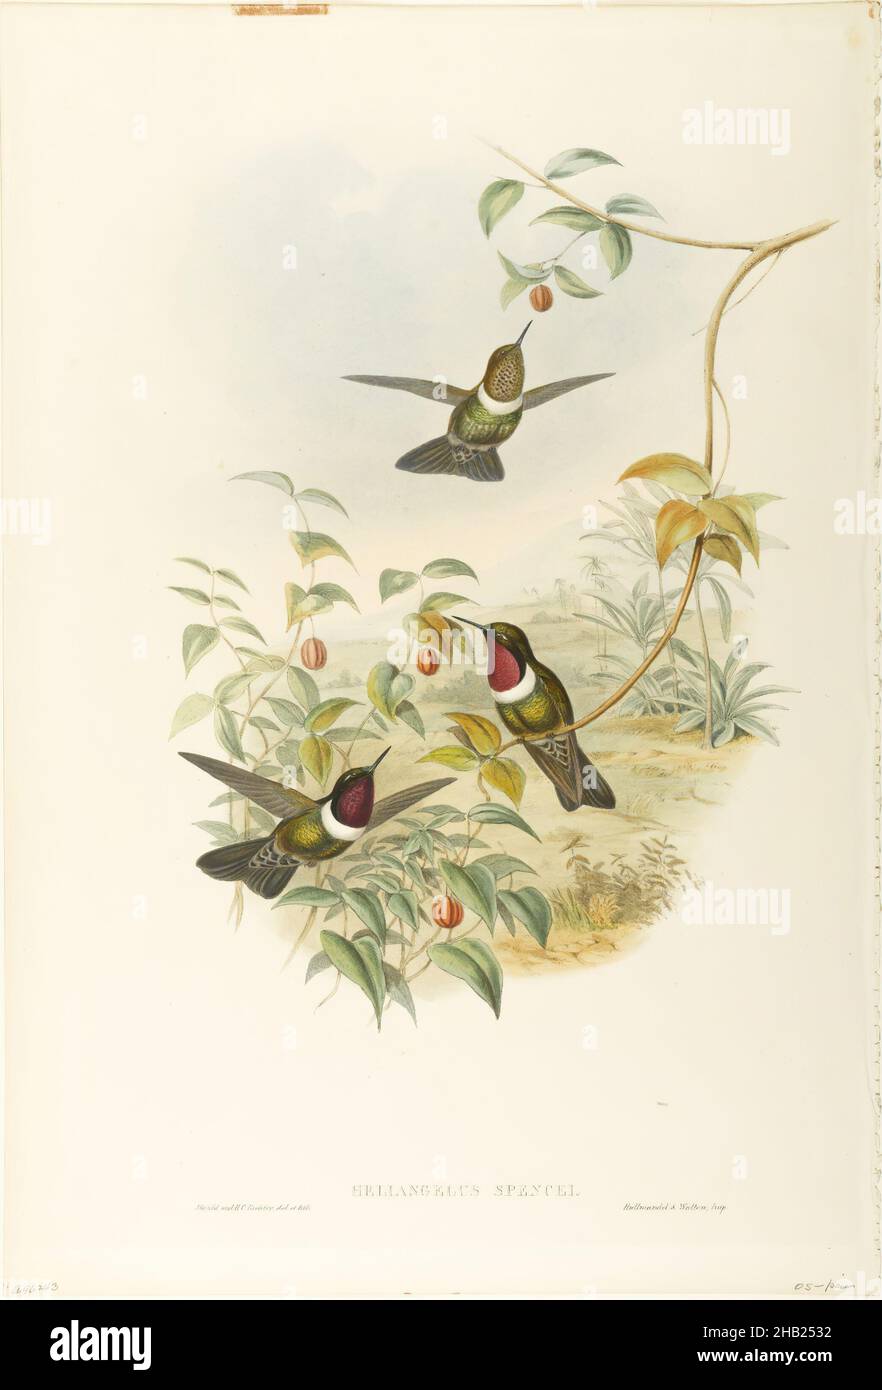 Heliangelus Spencei: Spenser's Sun Angel, John Gould, British, 1804-1881, Lithograph in color on wove paper, 21 1/2 x 14 3/8 in., 54.6 x 36.5 cm Stock Photo